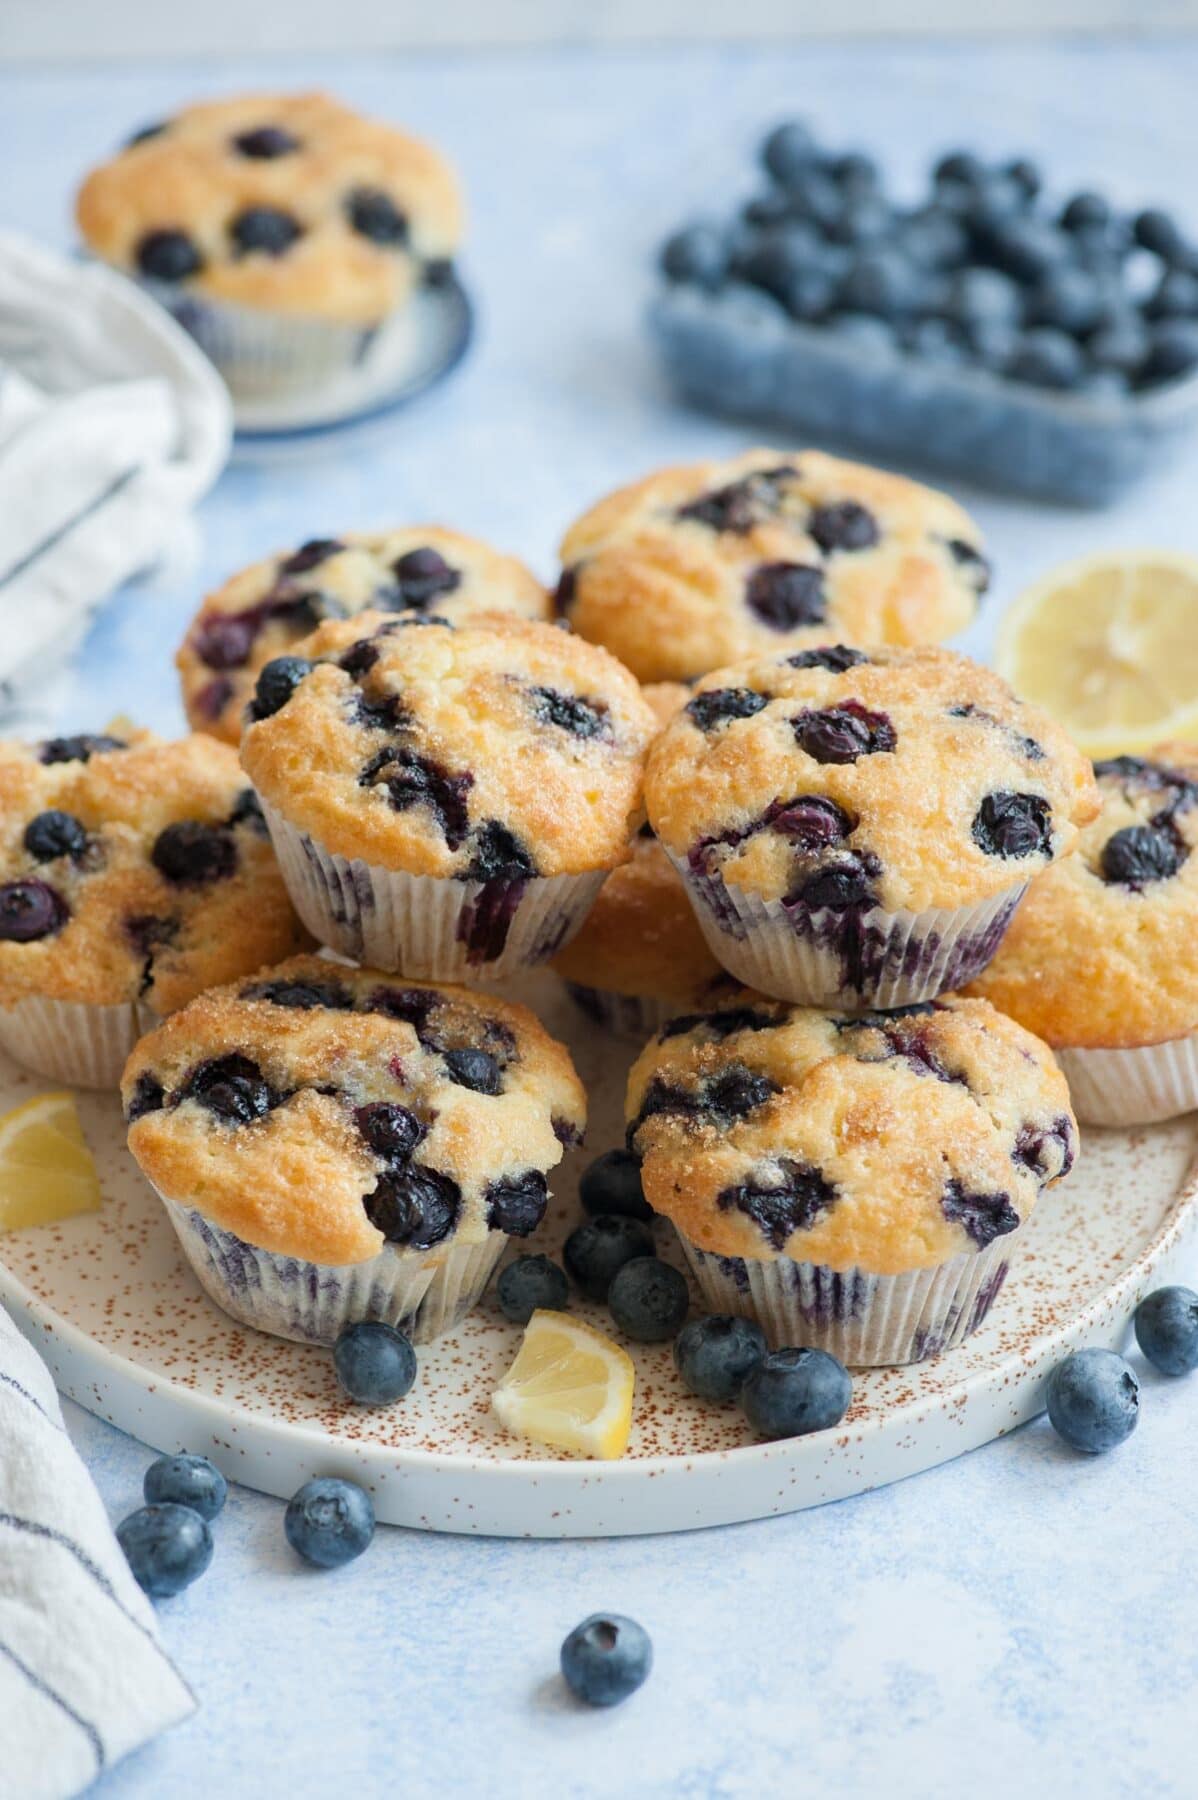 https://www.everyday-delicious.com/wp-content/uploads/2021/08/blueberry-muffins-everyday-delicious-1-1198x1800.jpg